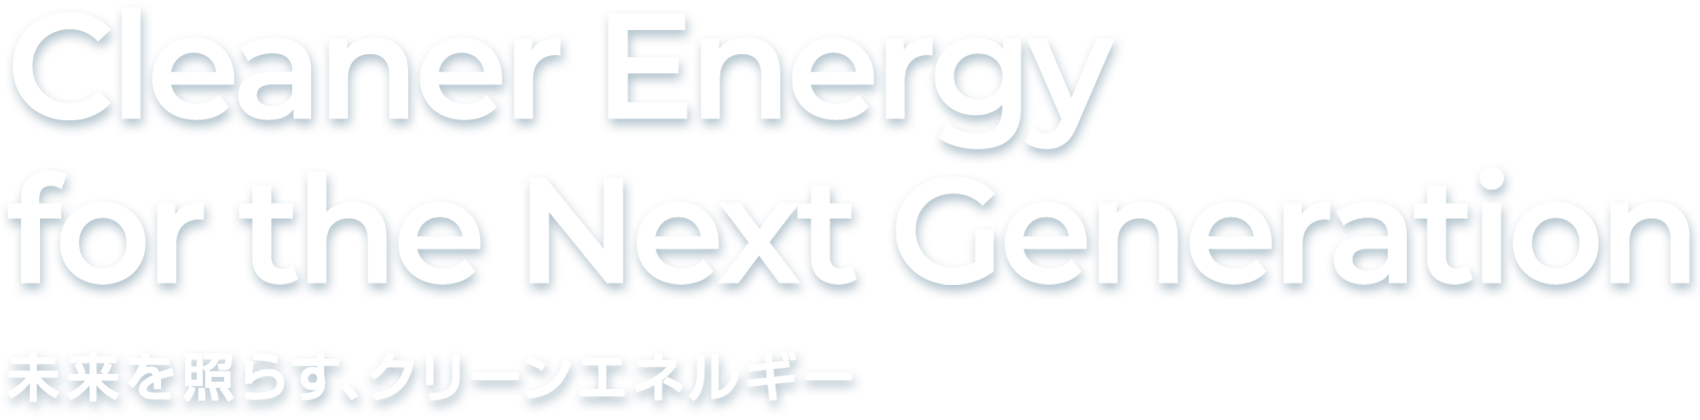 Cleaner Energy for the Next Generation 未来を照らす、クリーンエネルギー